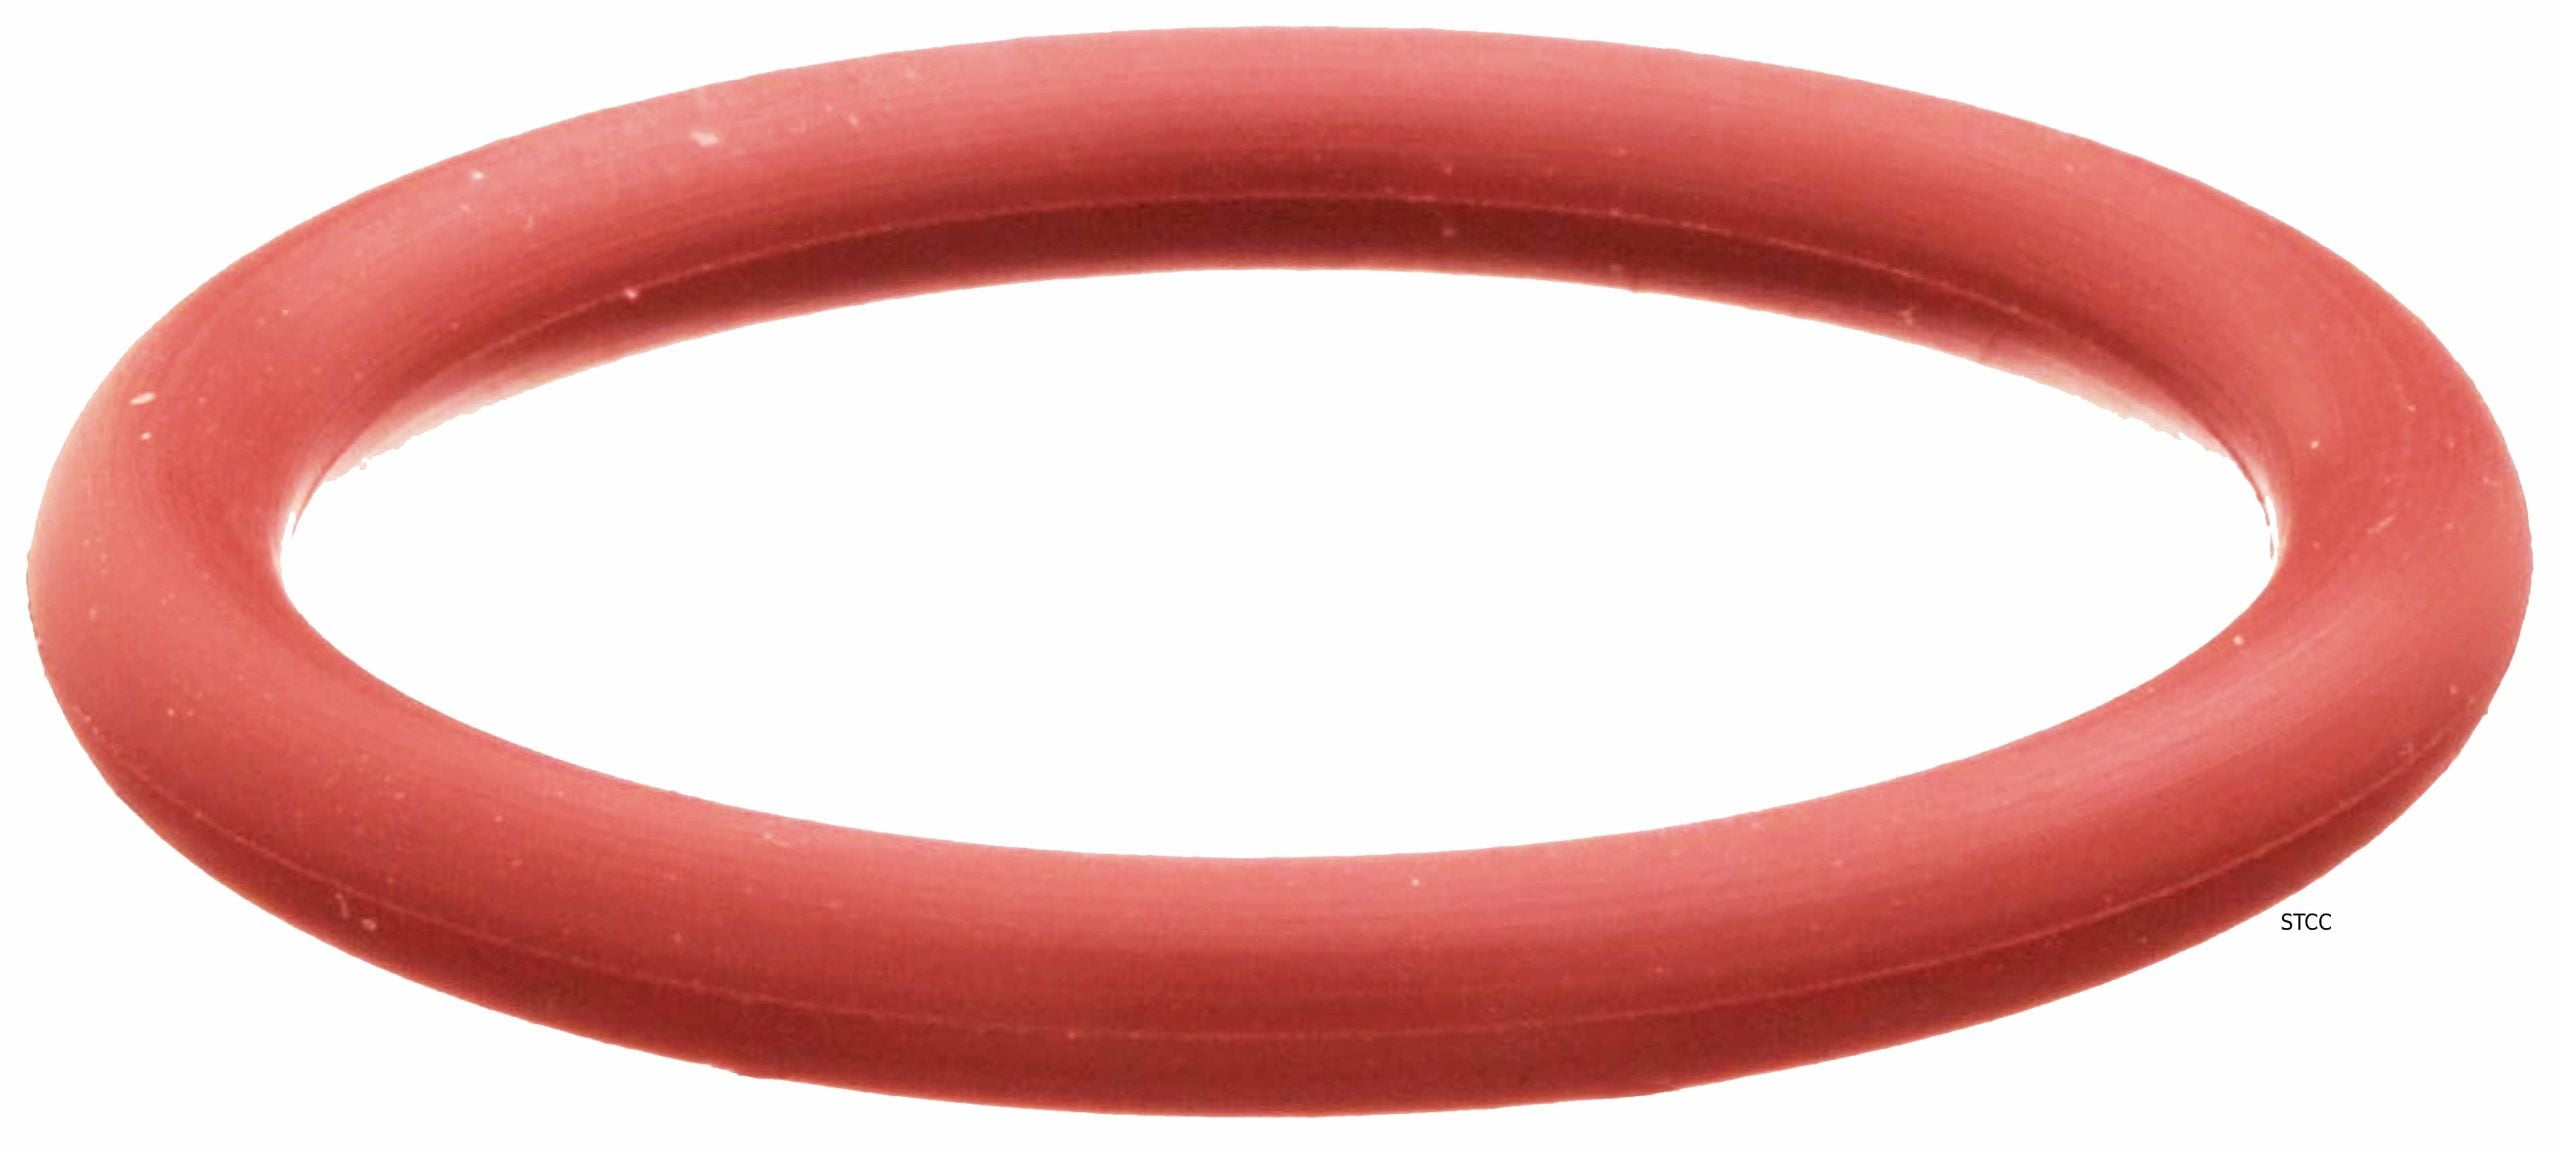 1/16" Width 100-Pack 5/32" ID 70A Durometer Red 007 Silicone O-Ring 9/32" OD 